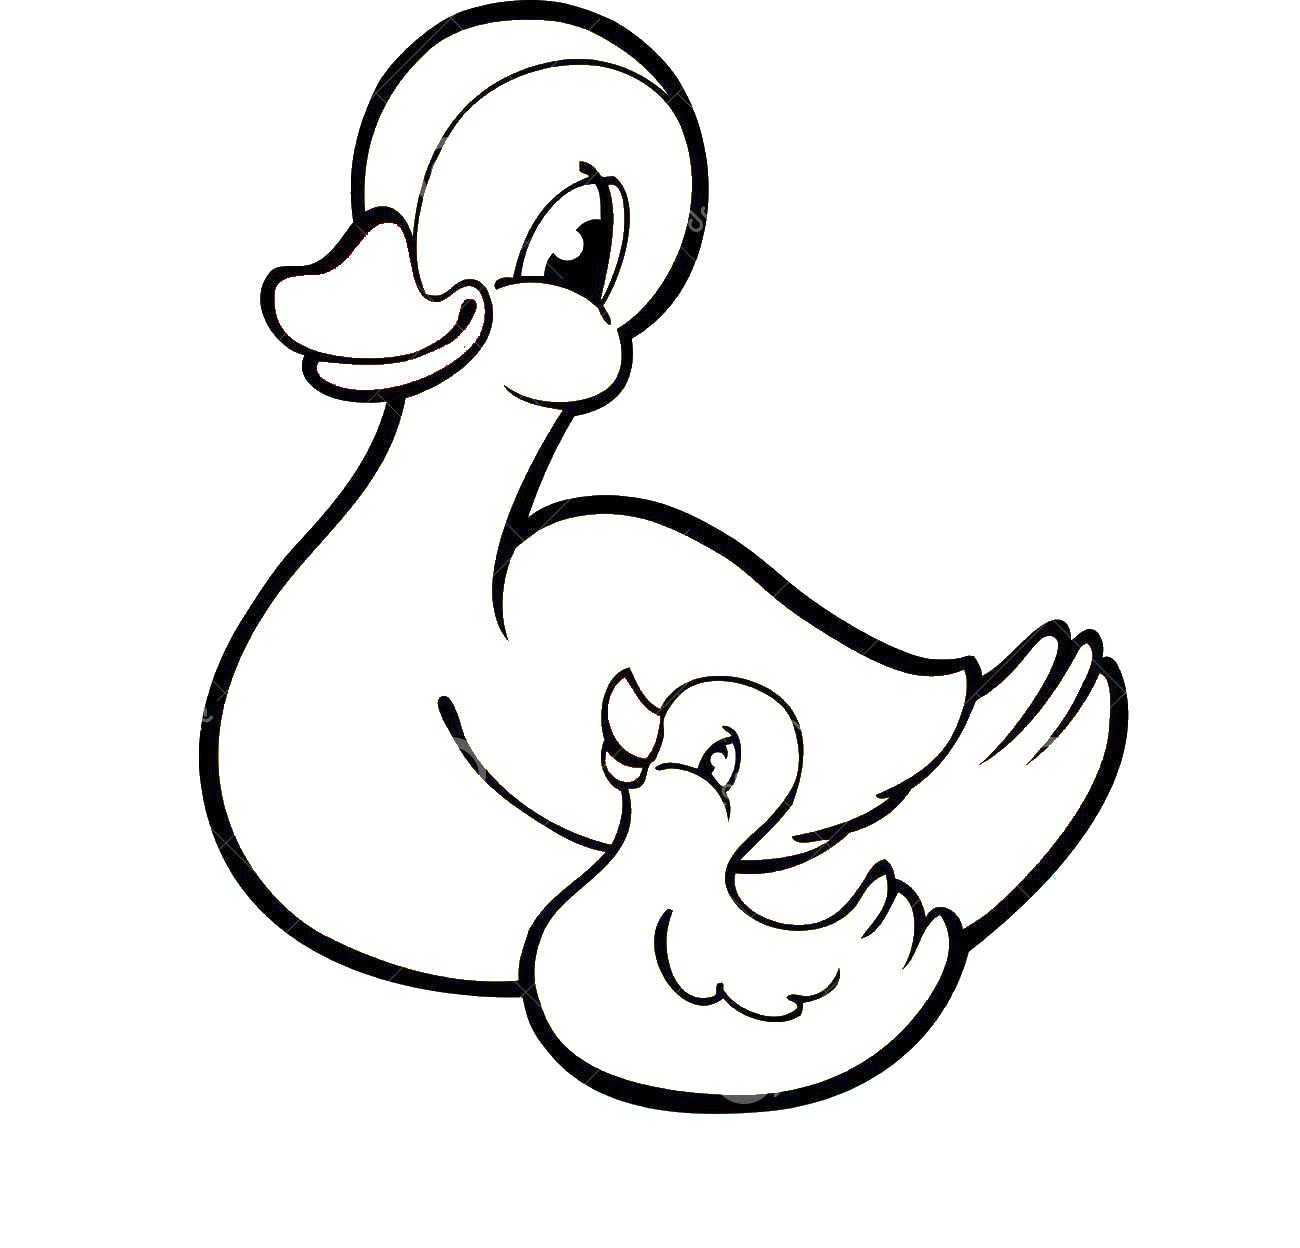 Coloring Duck with duckling. Category The contours for cutting out the birds. Tags:  duck, duckling.